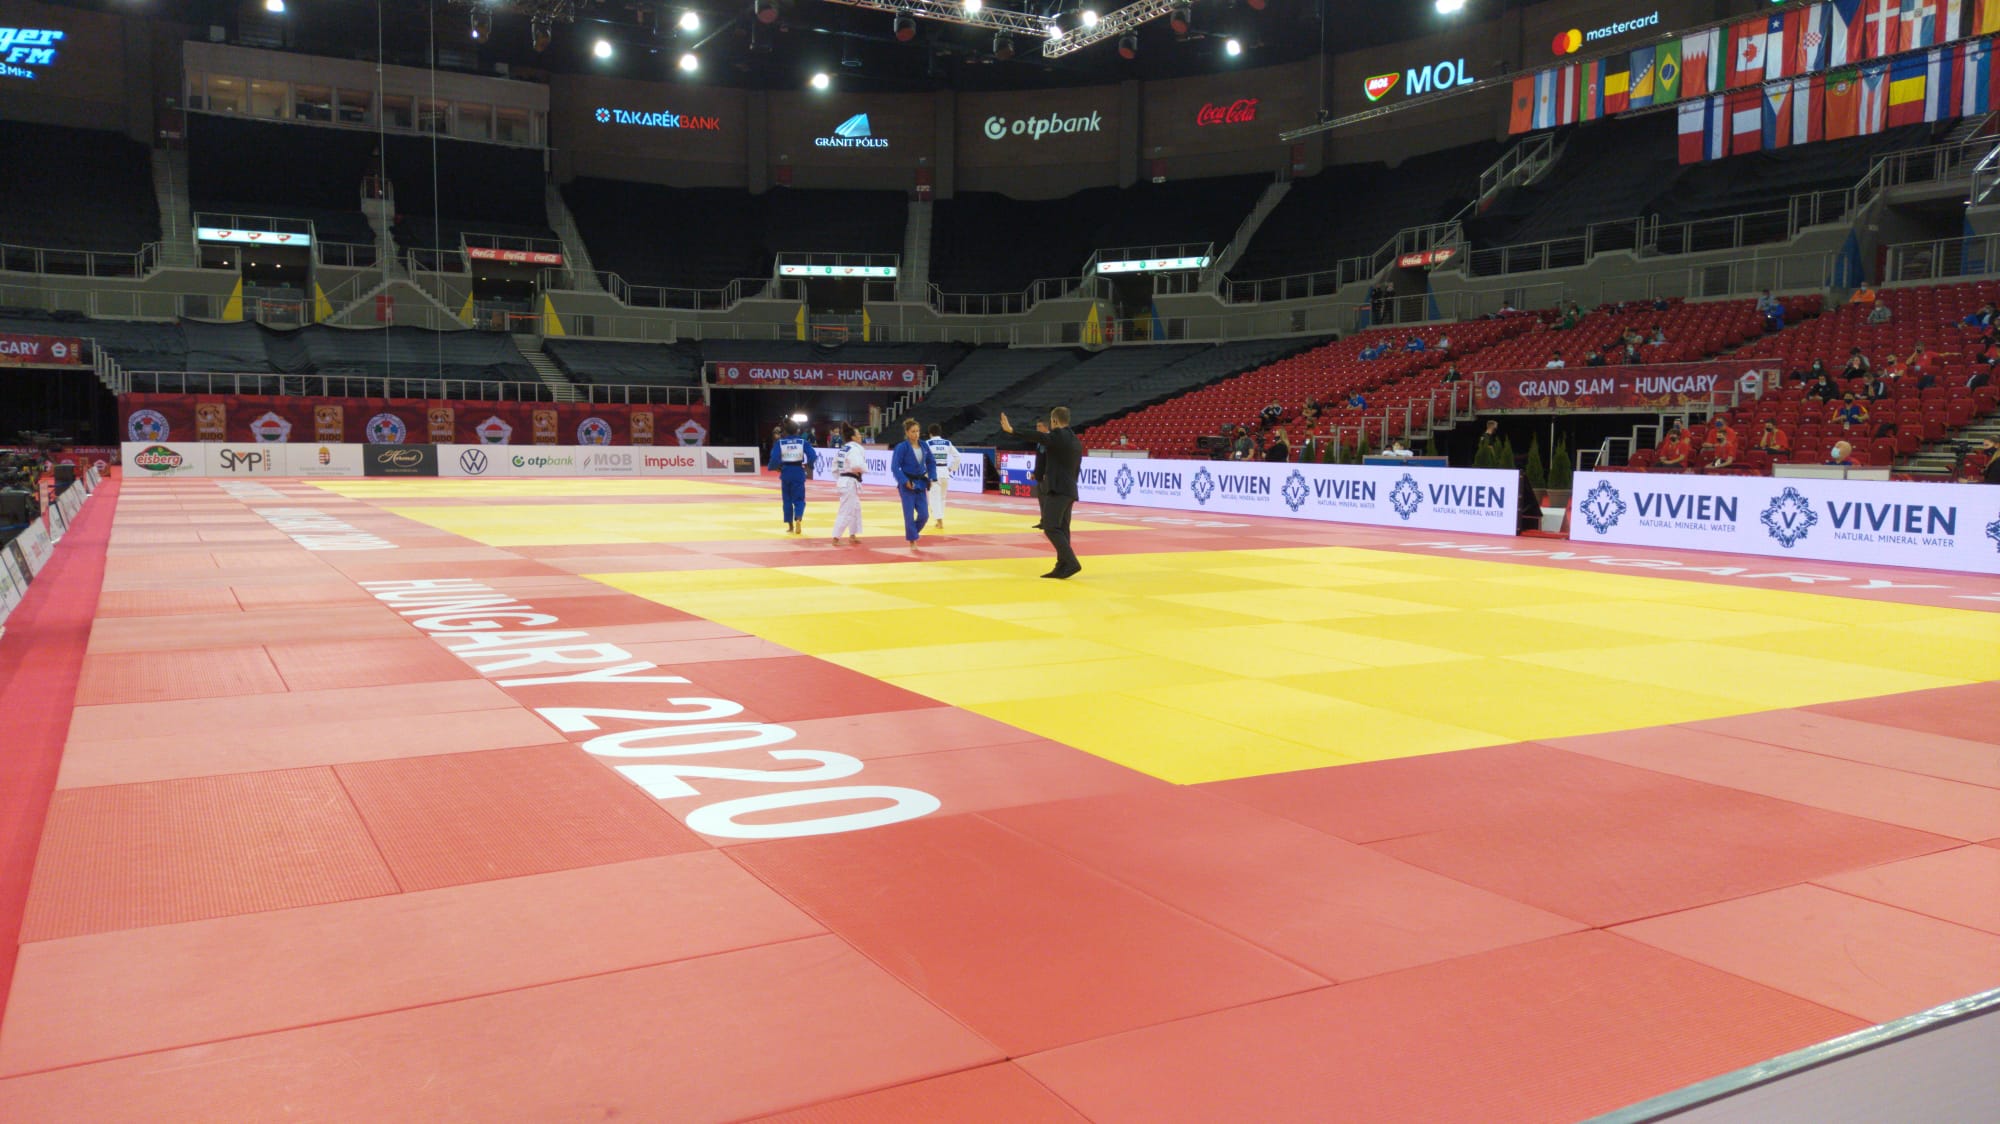 HUNGARY HOSTS THE RETURN OF THE IJF TOUR